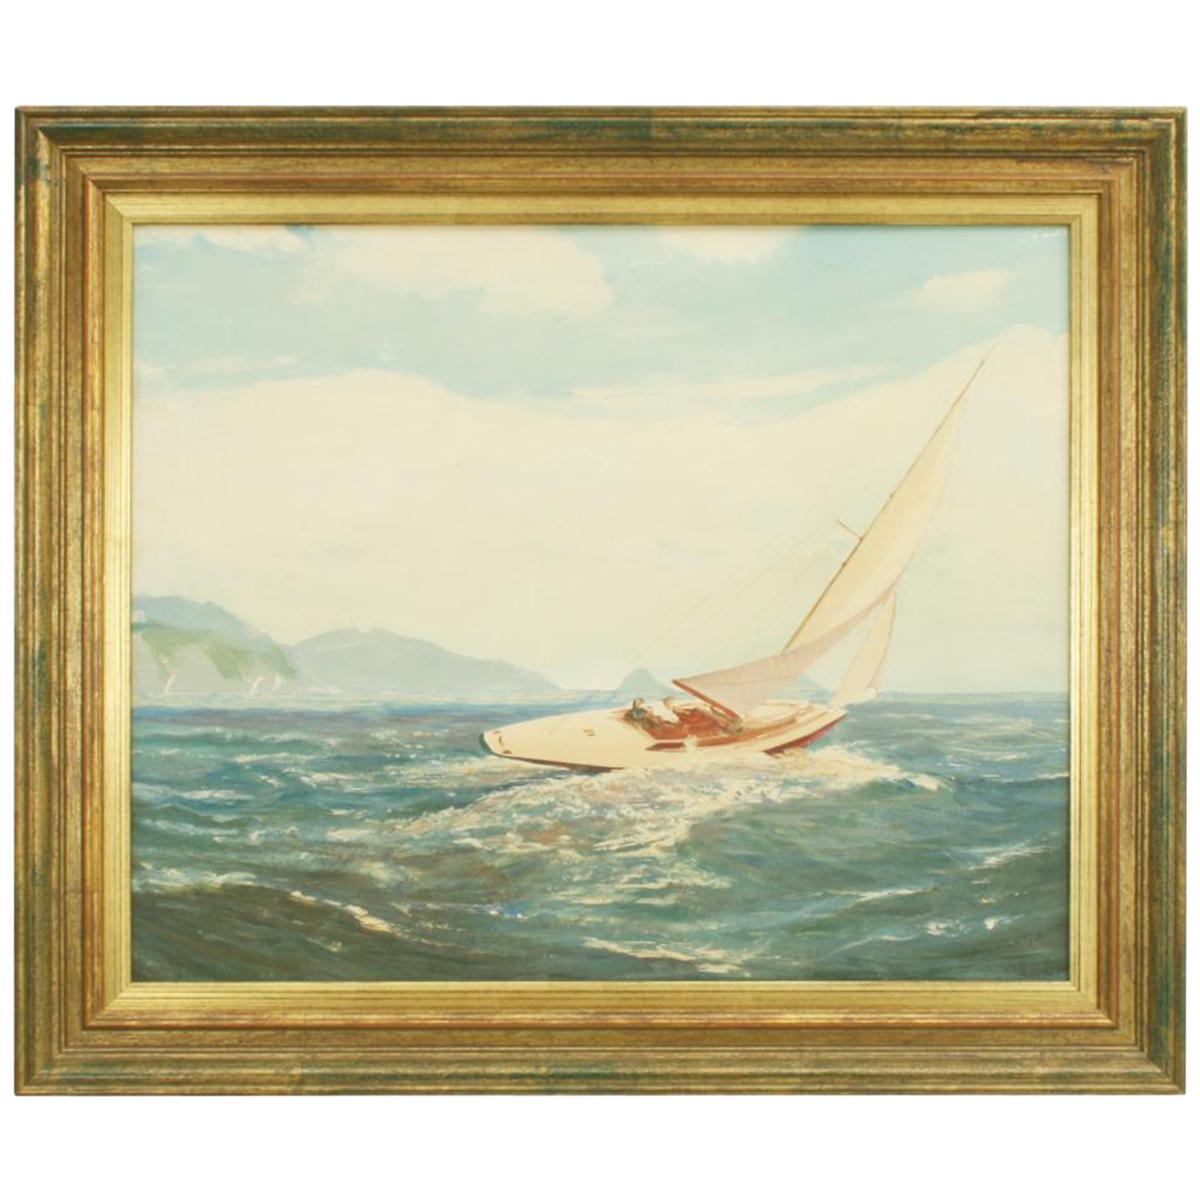 Yachting Oil Painting, a Good Breeze